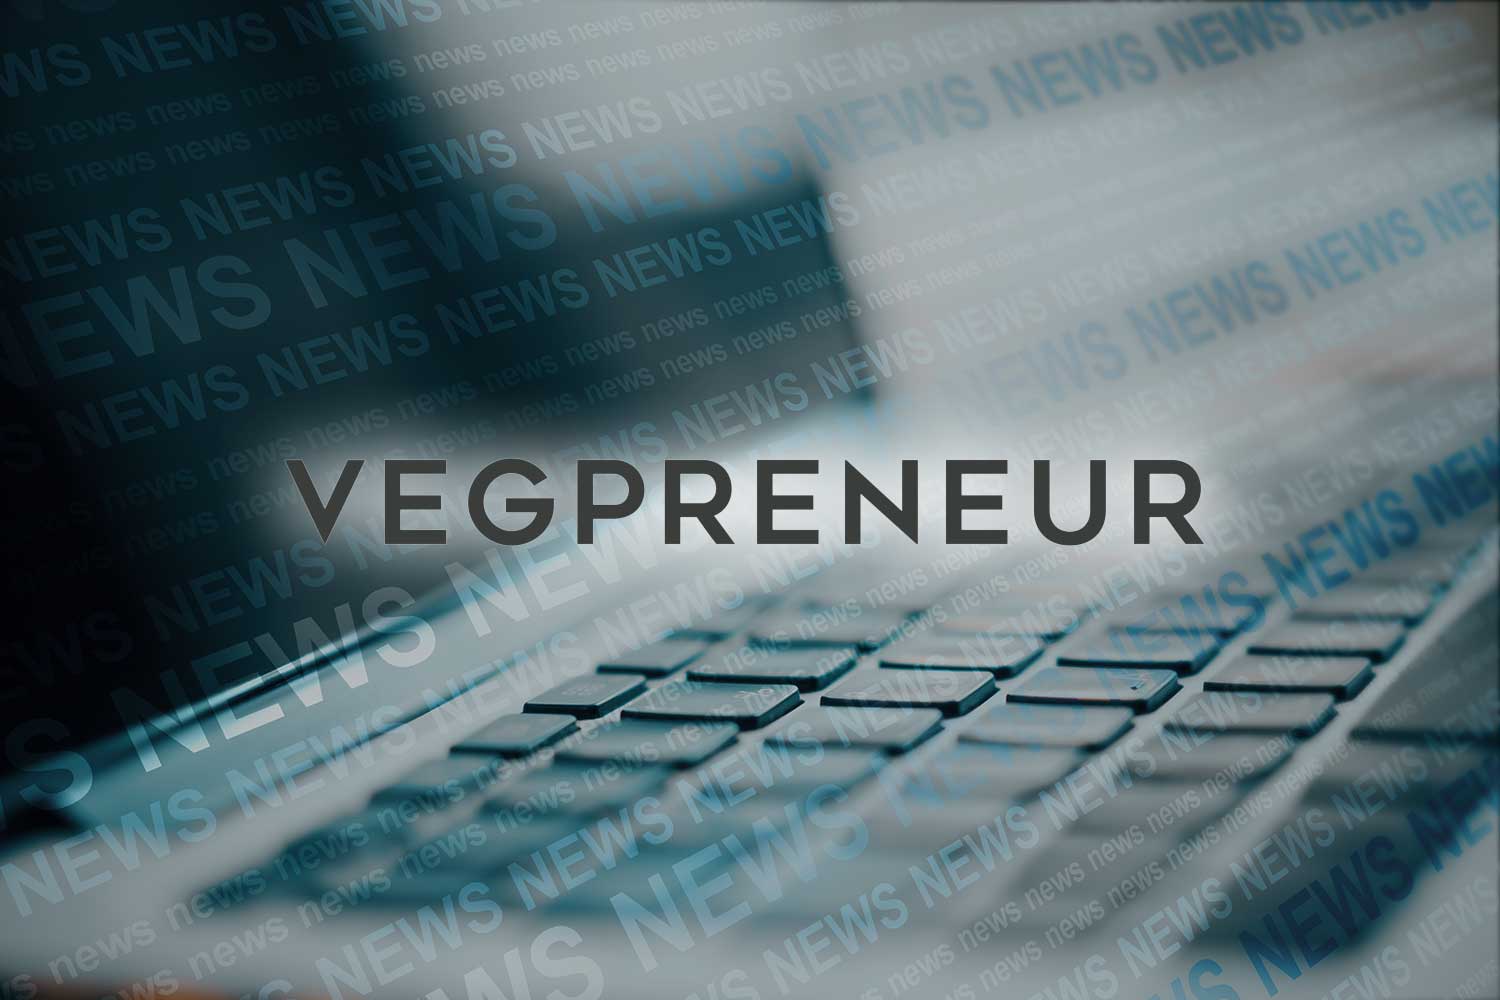 Vegan and Sustainable Startups You Can Invest In Now (January 2021)